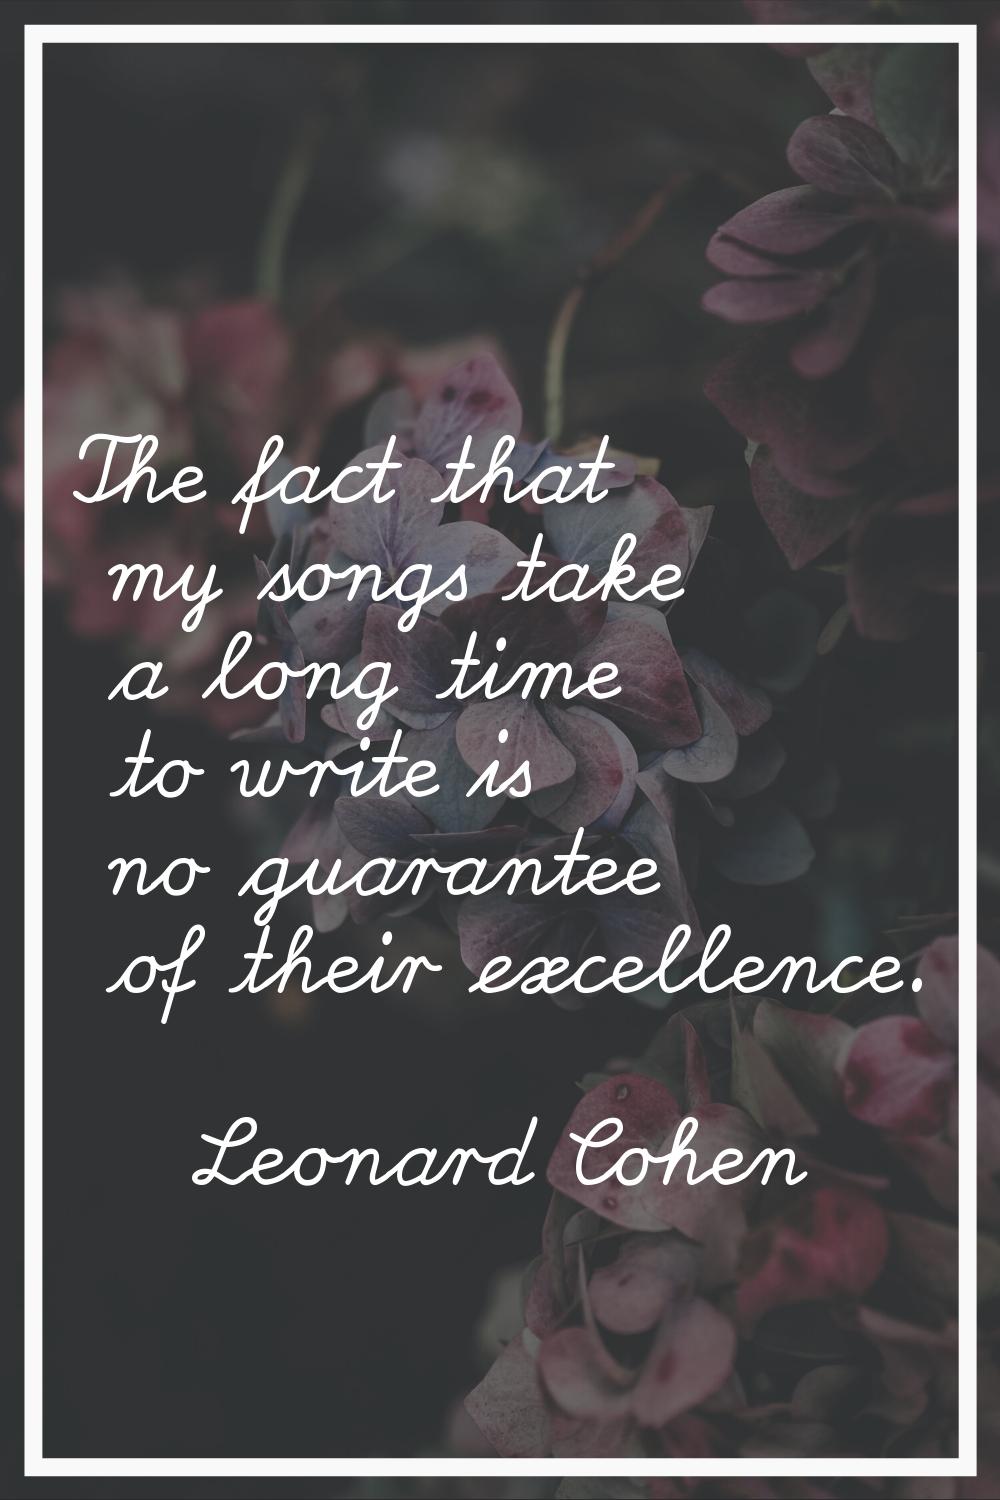 The fact that my songs take a long time to write is no guarantee of their excellence.